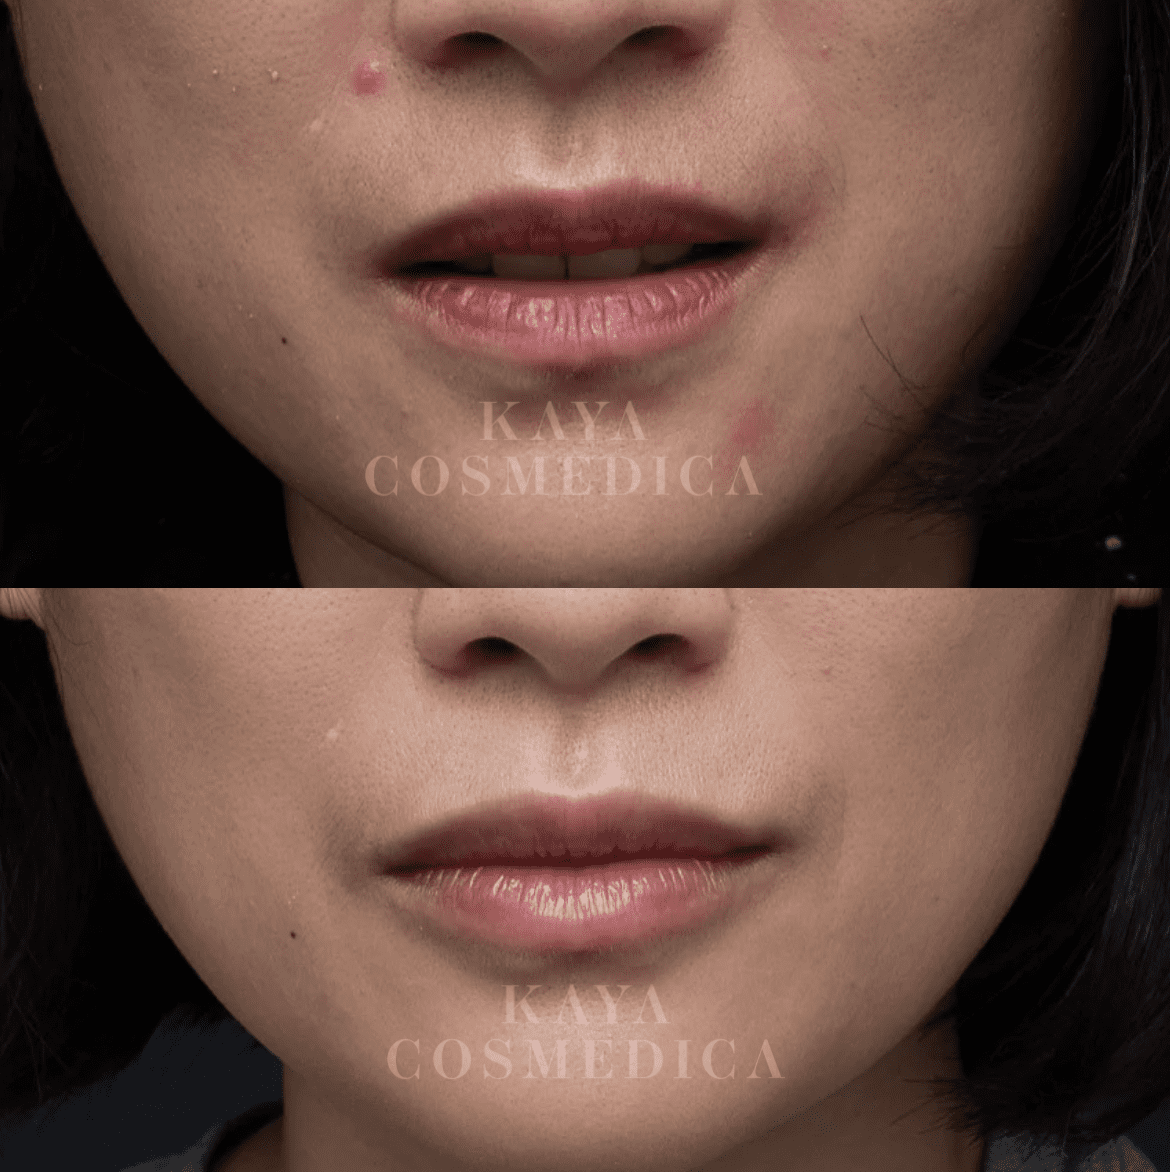 Close-up comparison of a woman's lips before and after treatment, labeled "kaya cosmedica." The top image shows lips with mild dryness and imperfections; the bottom image shows improved,